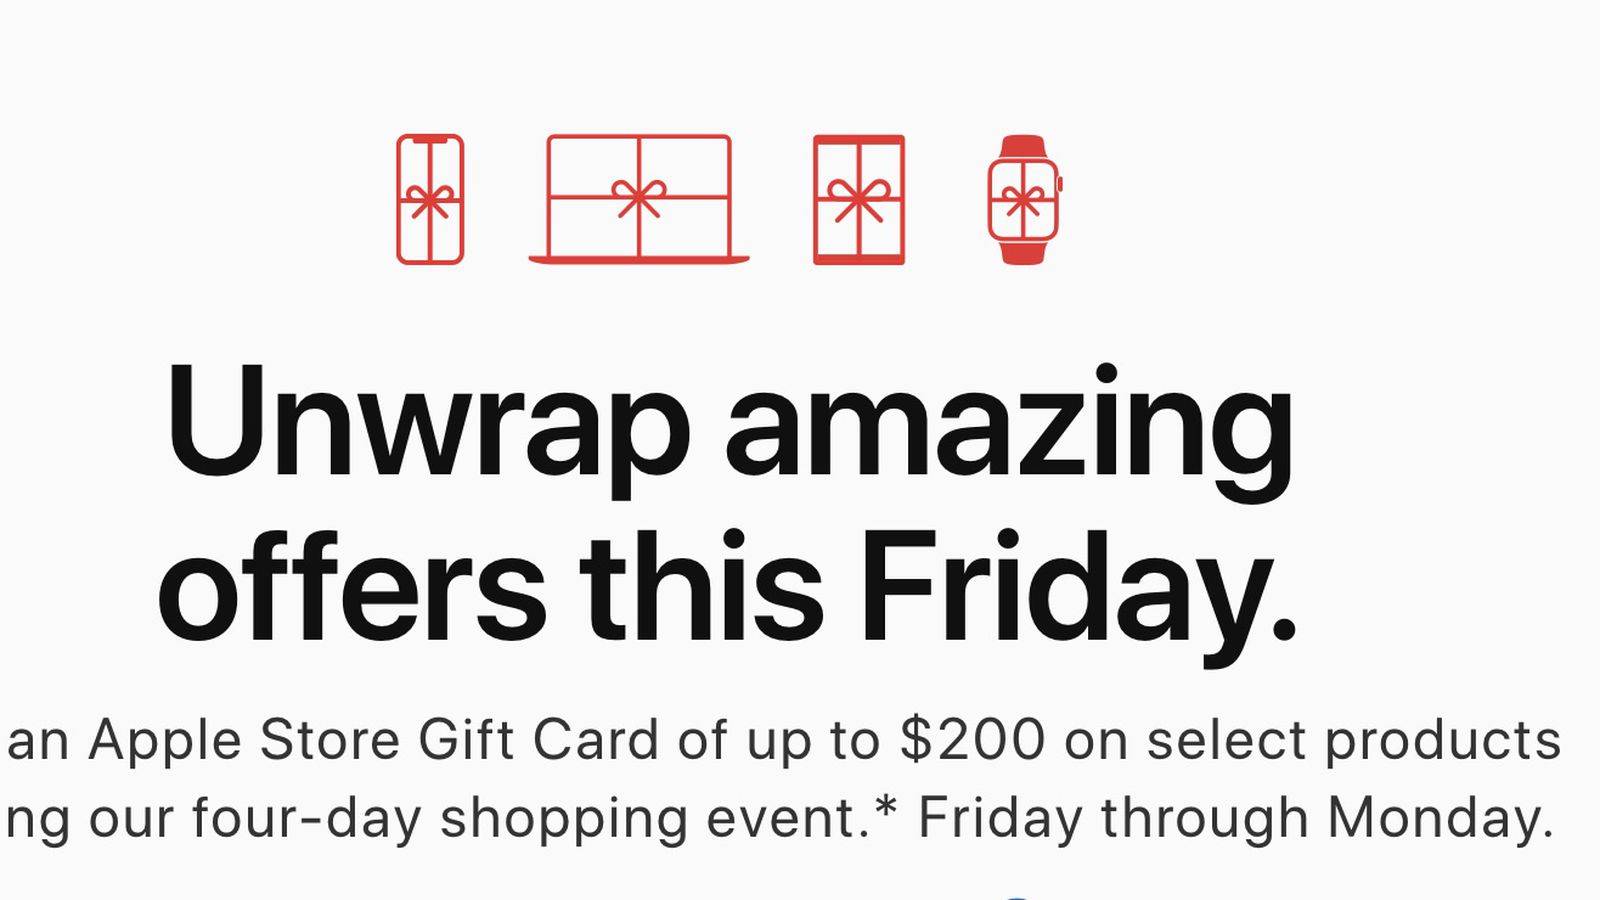 Apple Black Friday deal is all about gift cards